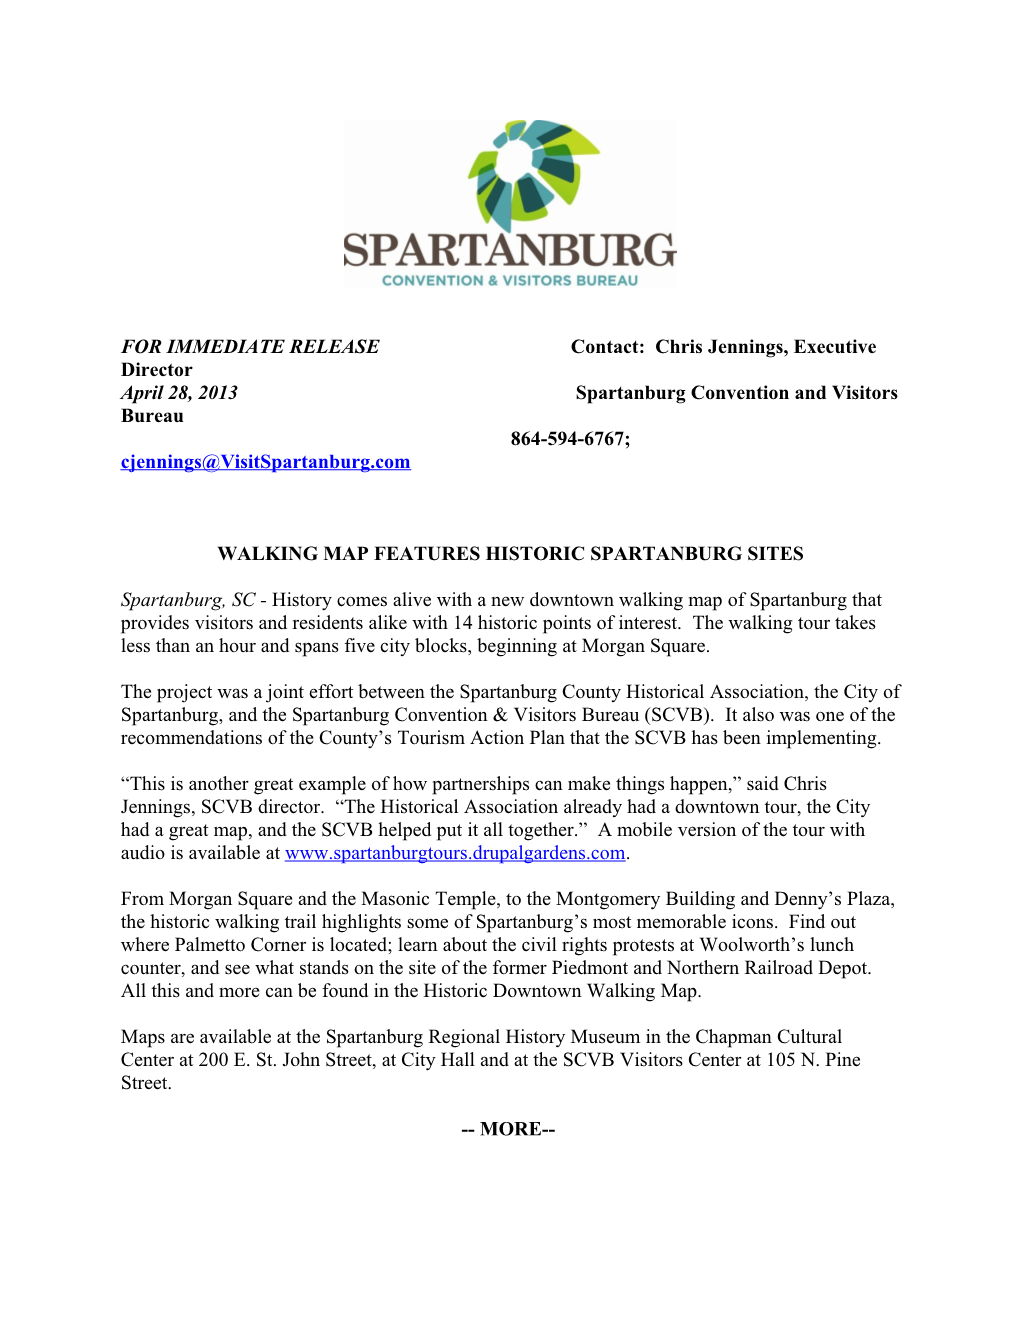 History Comes Alive with a New Downtown Walking Map of Spartanburg That Provides Visitors